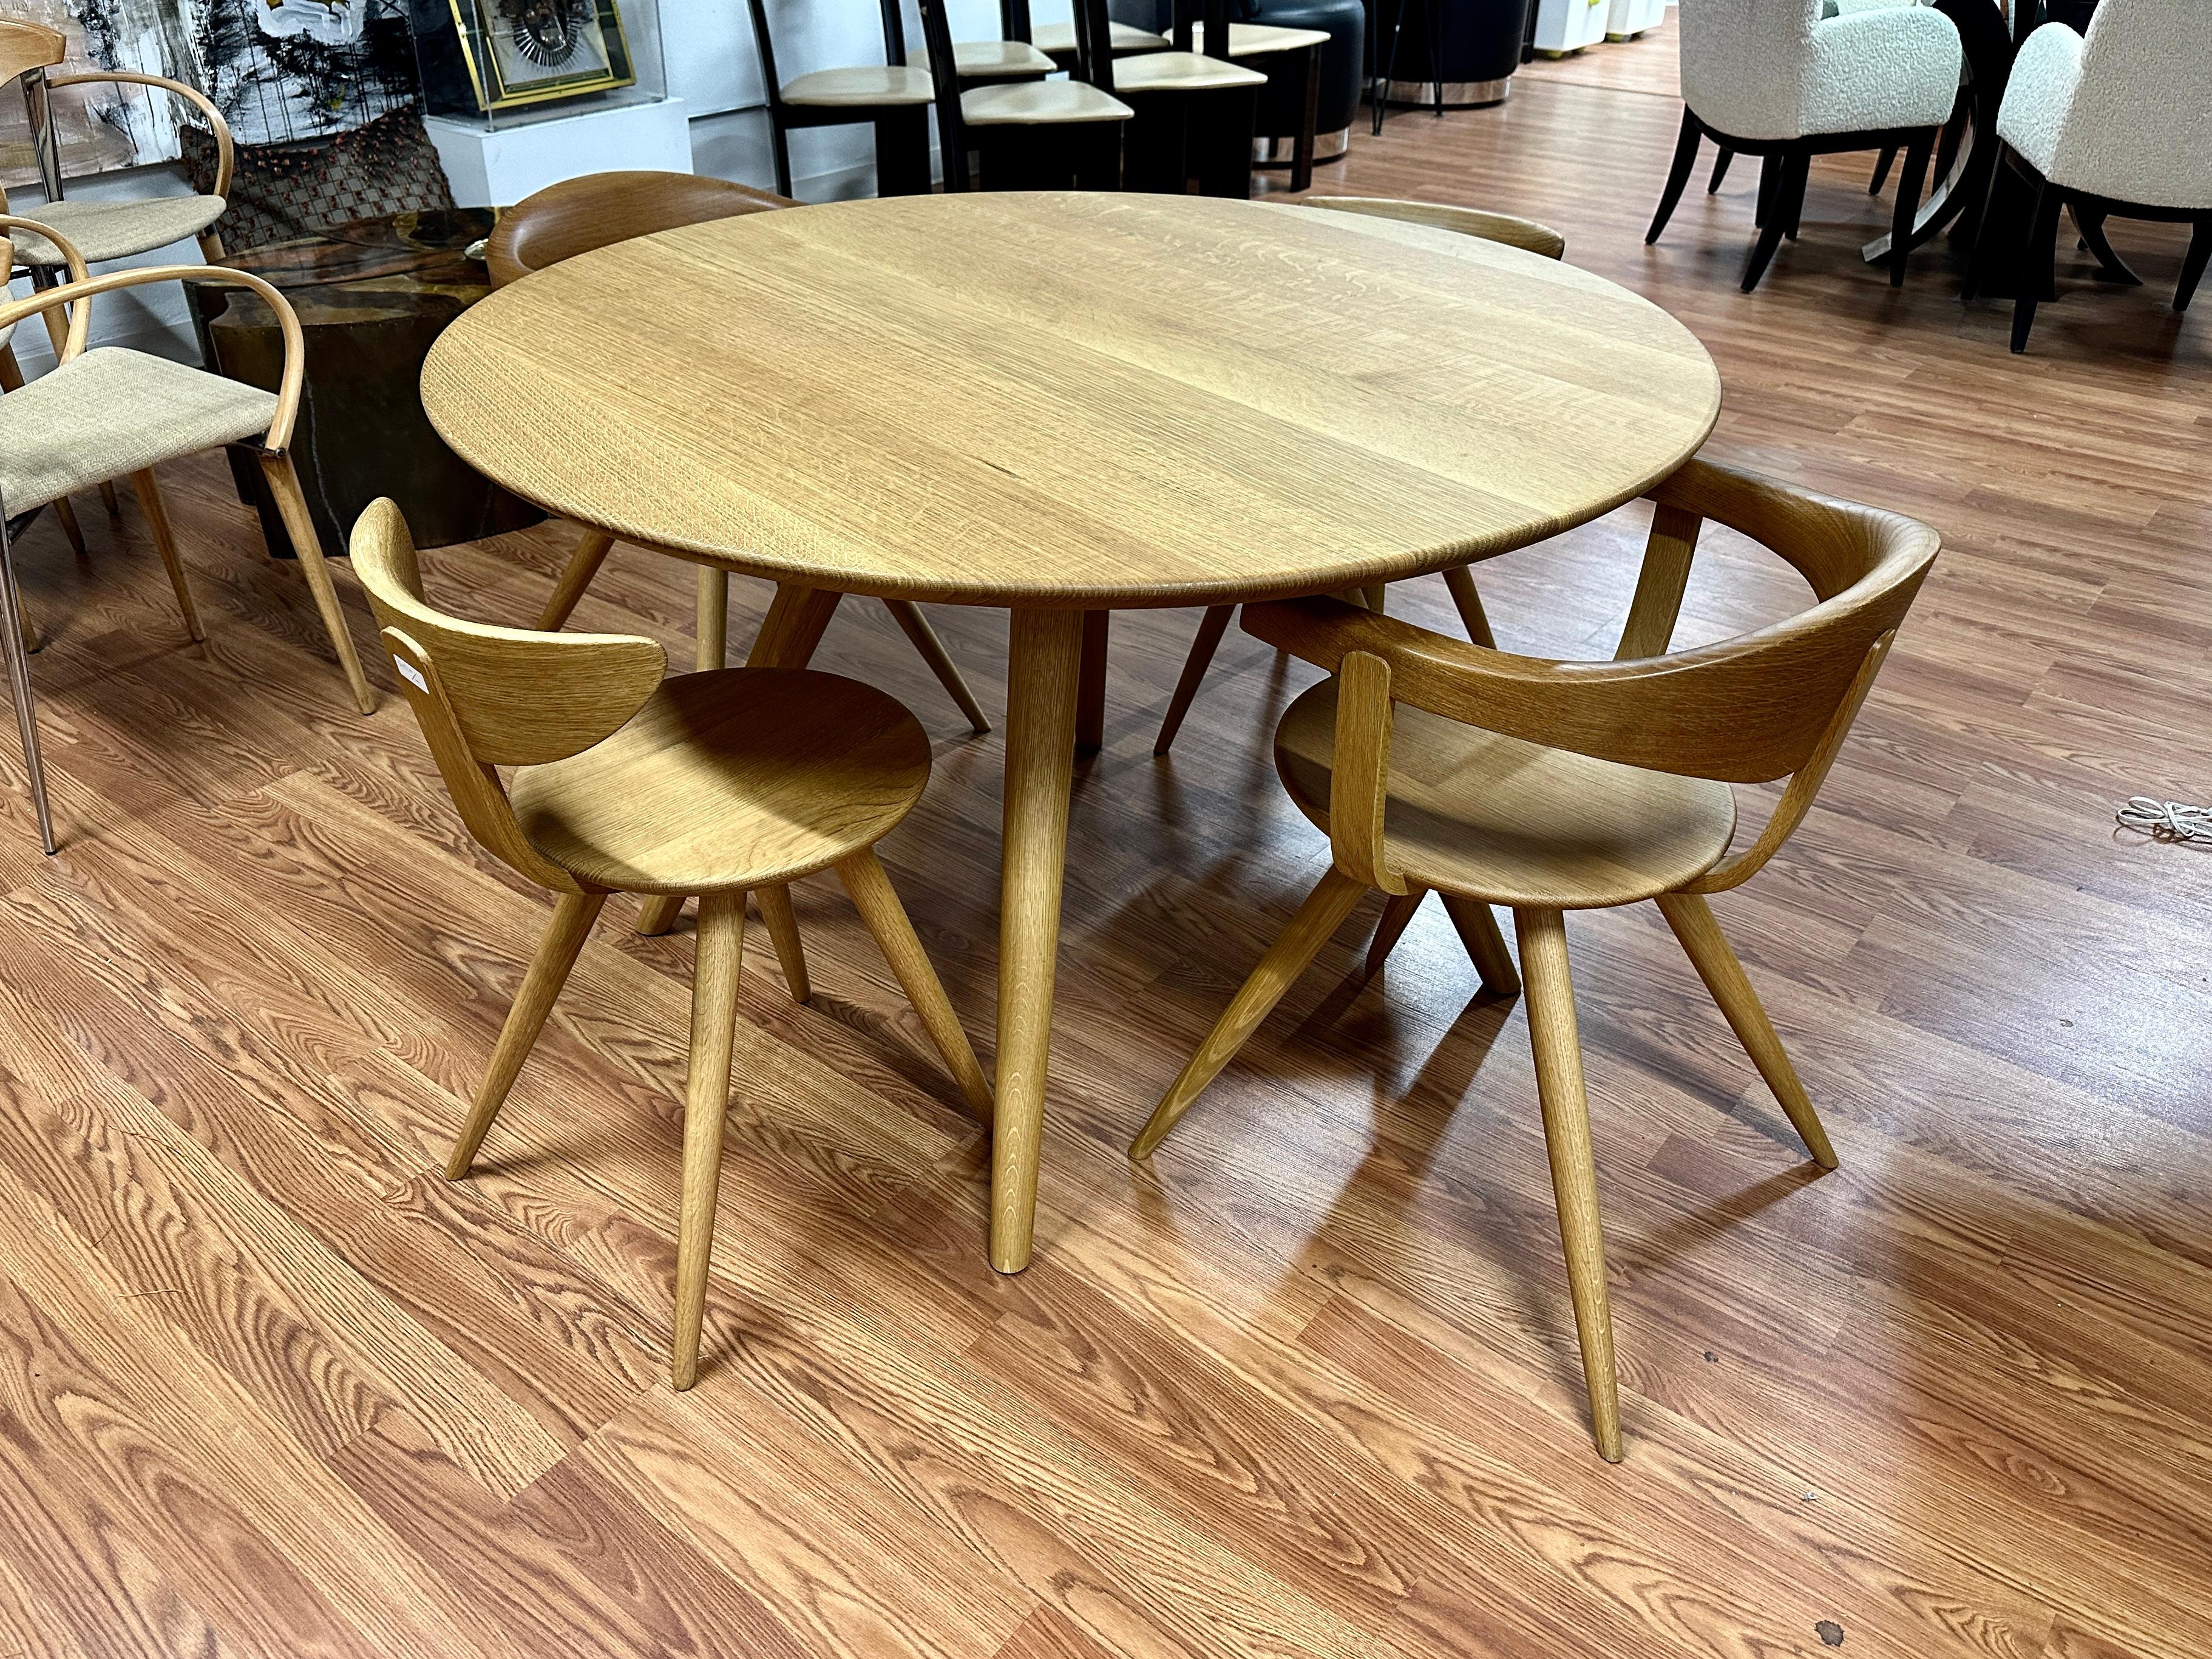 A beautiful dining table and chairs by Sori Yanaga Design for Hida of Japan. This wonderful set in oak consists of 2 armchairs, 2 side chairs and the 47 inch diameter table.
While he died in 2011 his design studio is still producing his designs with